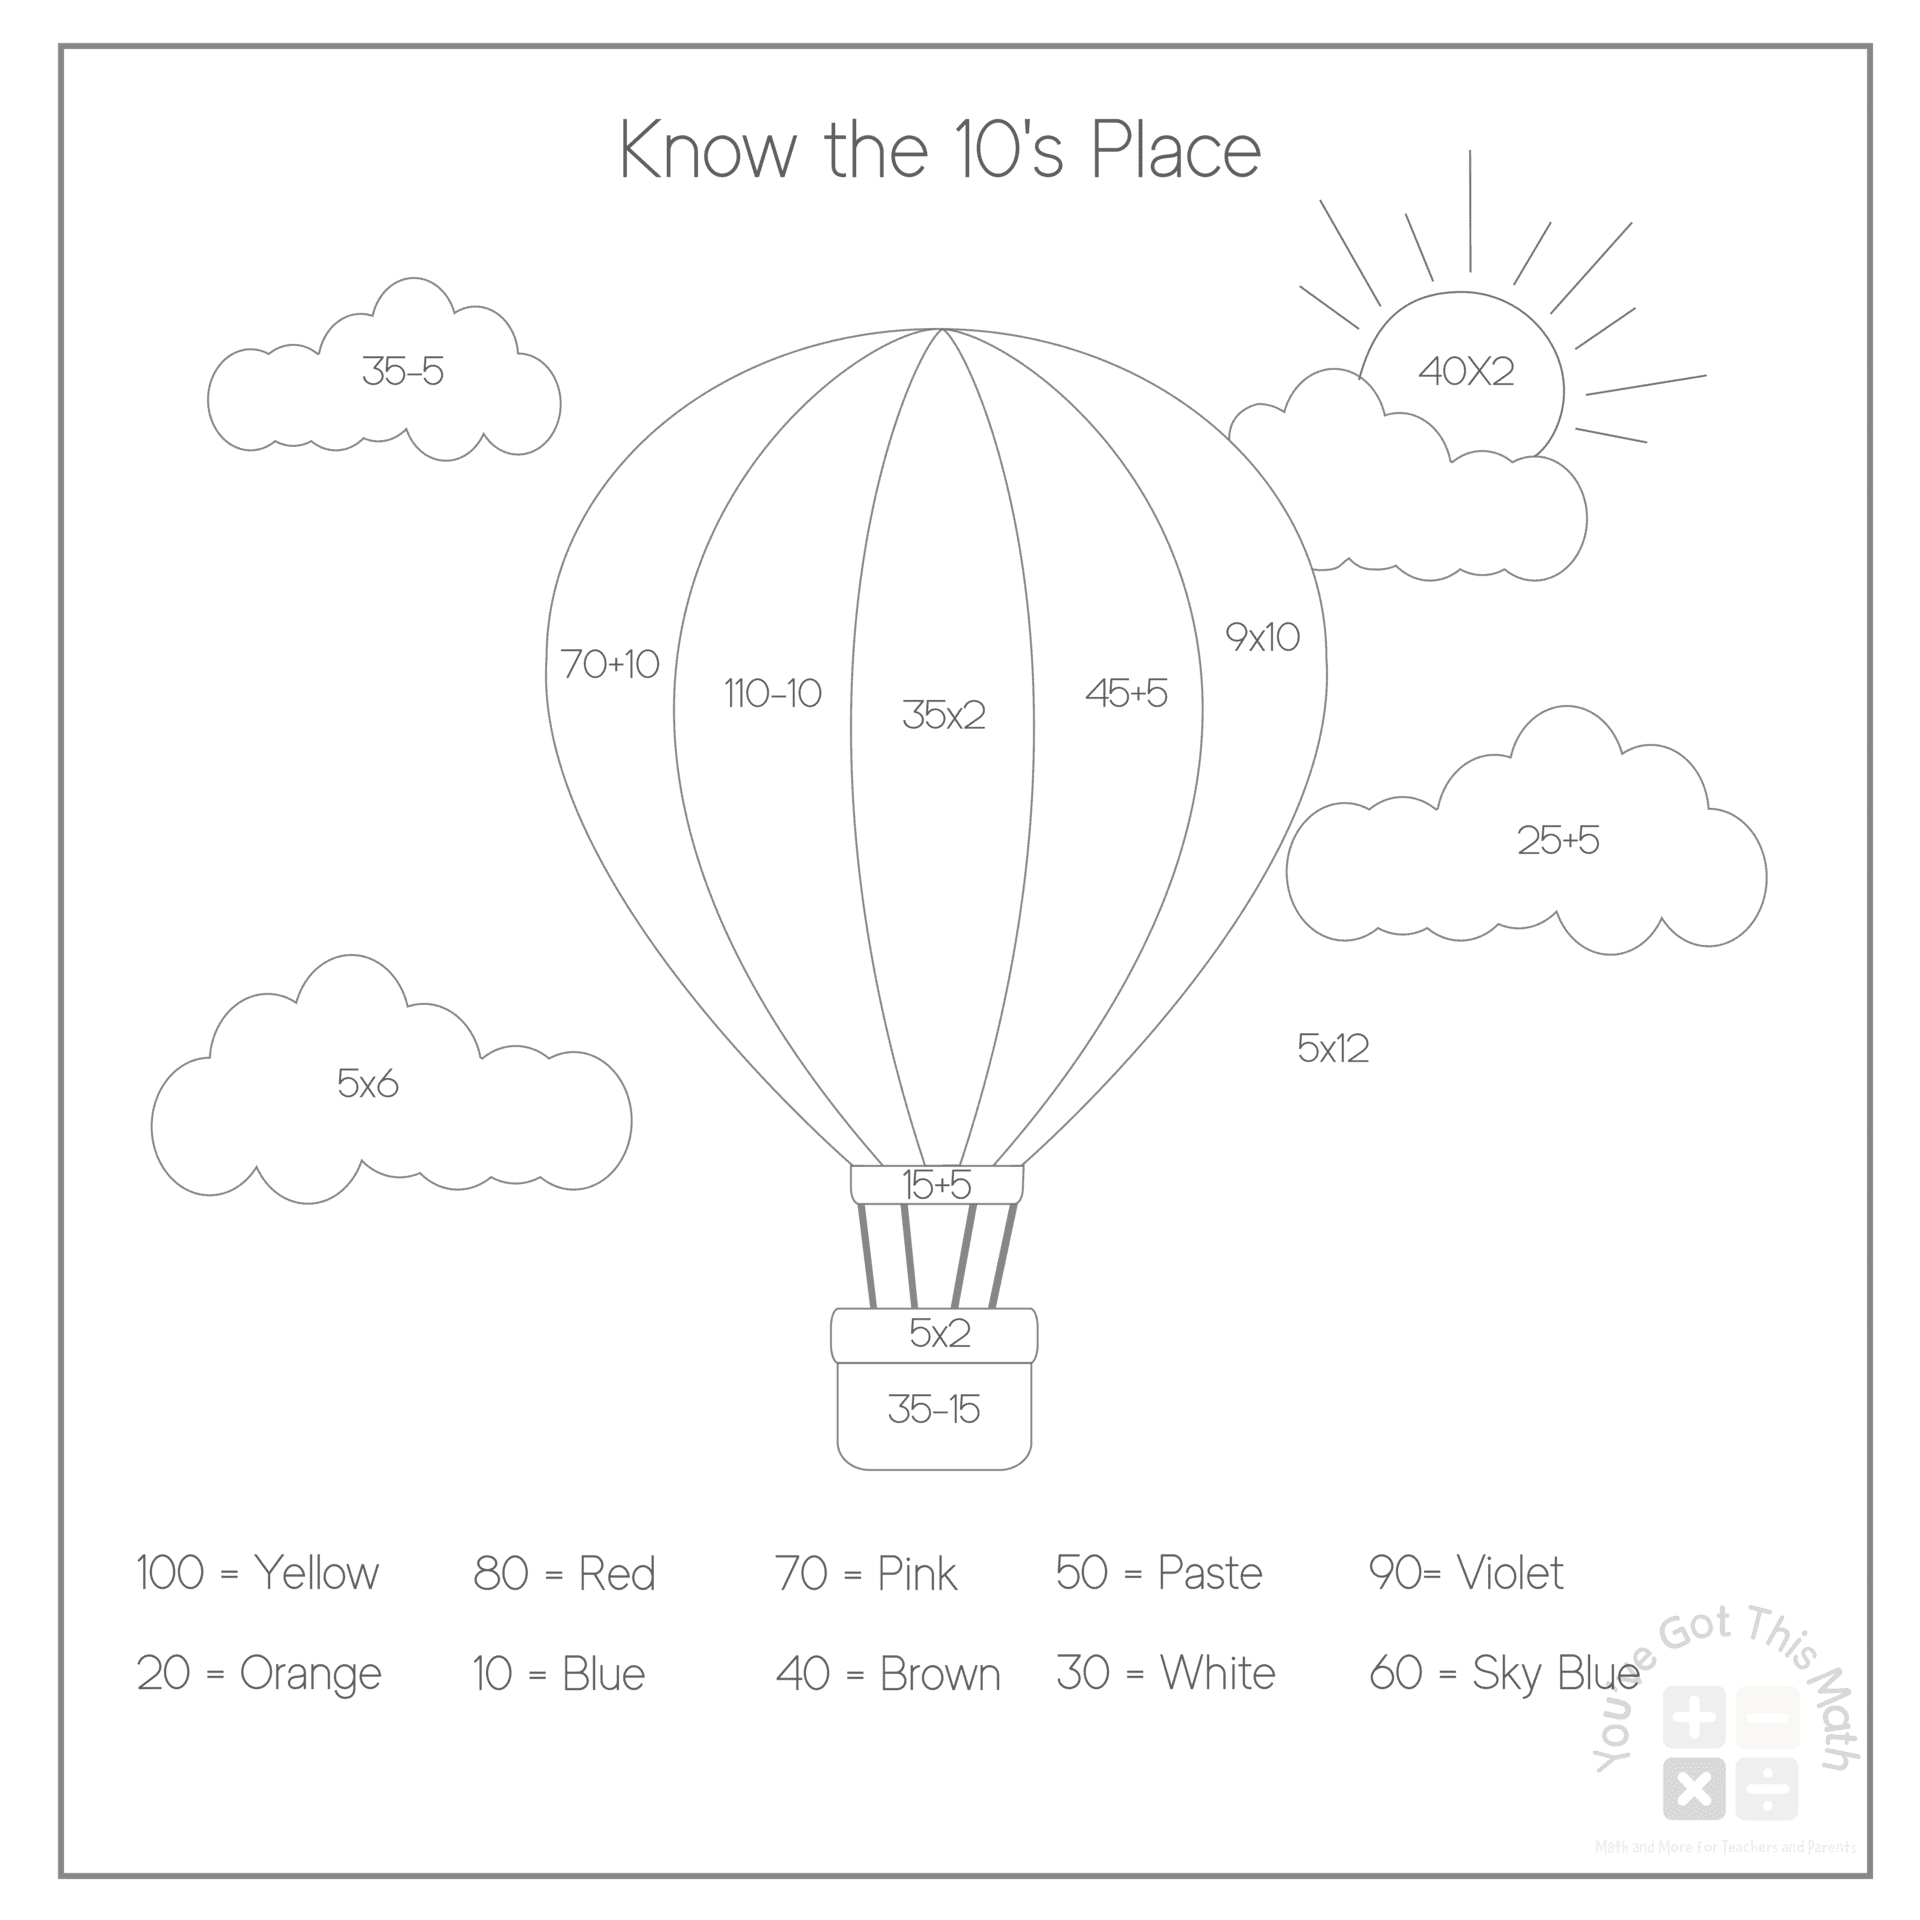 Calculating Values of 10s Place to Color Hot Air Balloon